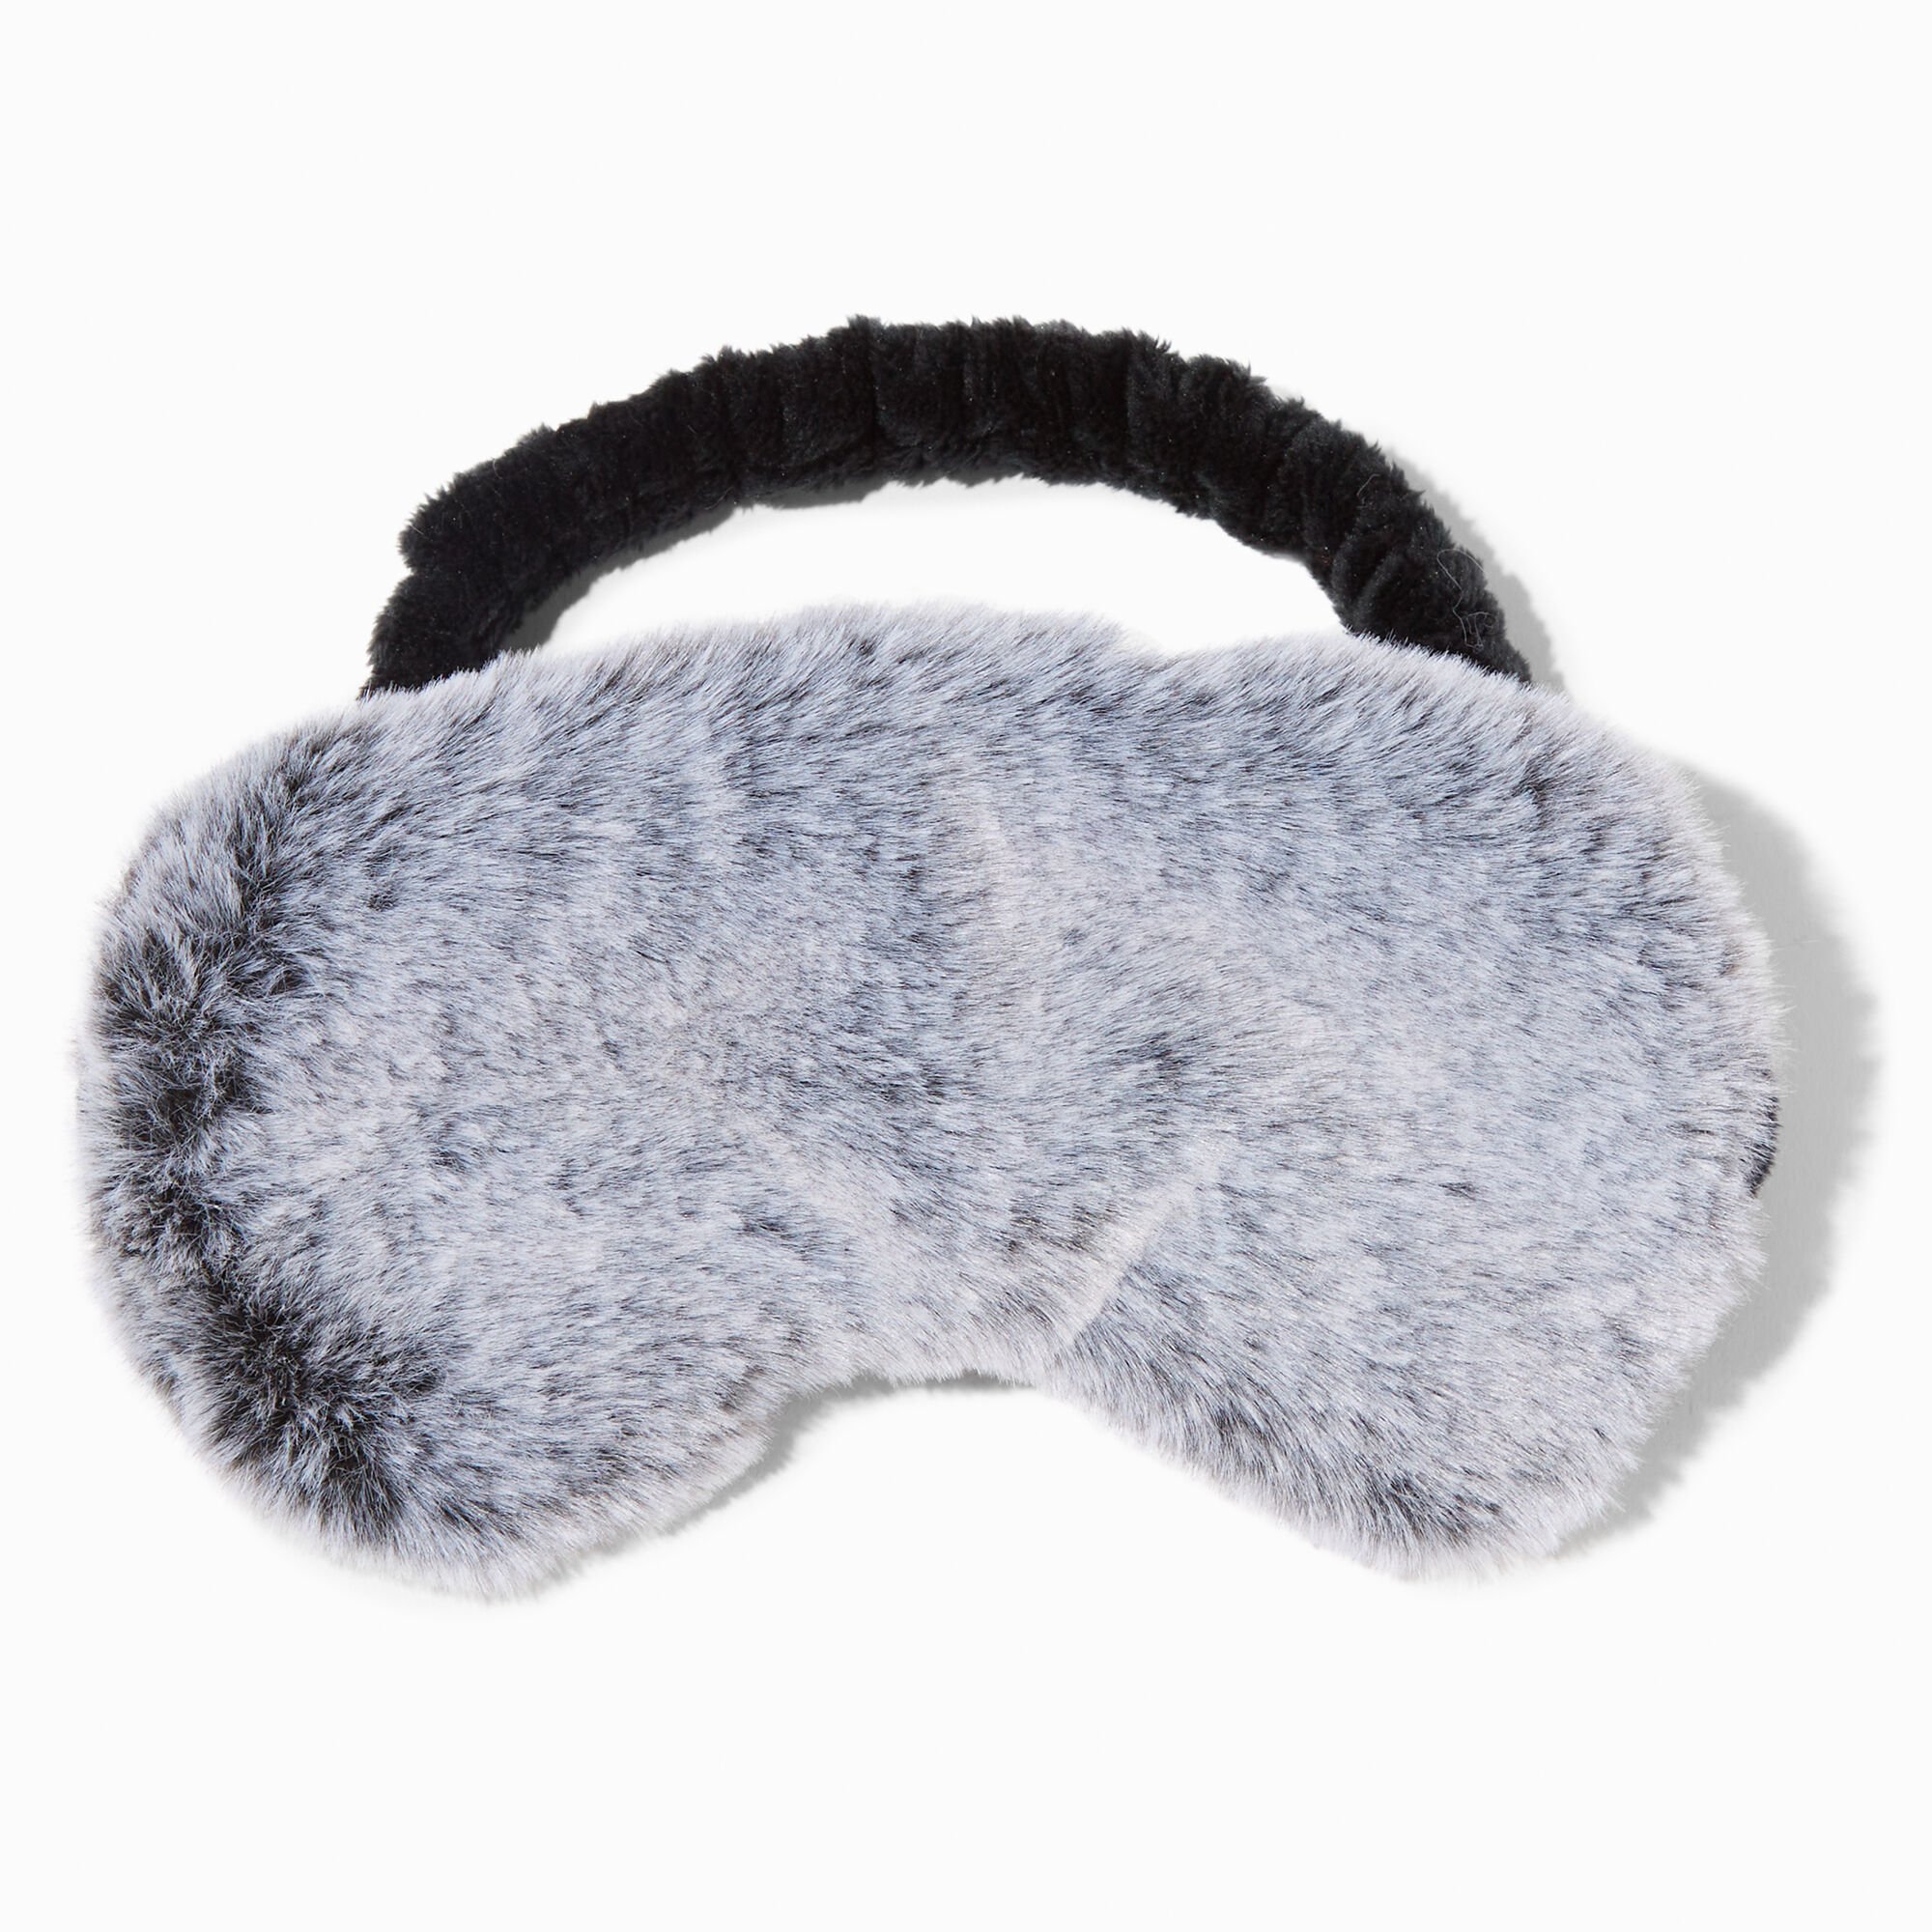 View Claires Furry Sleeping Mask Grey information